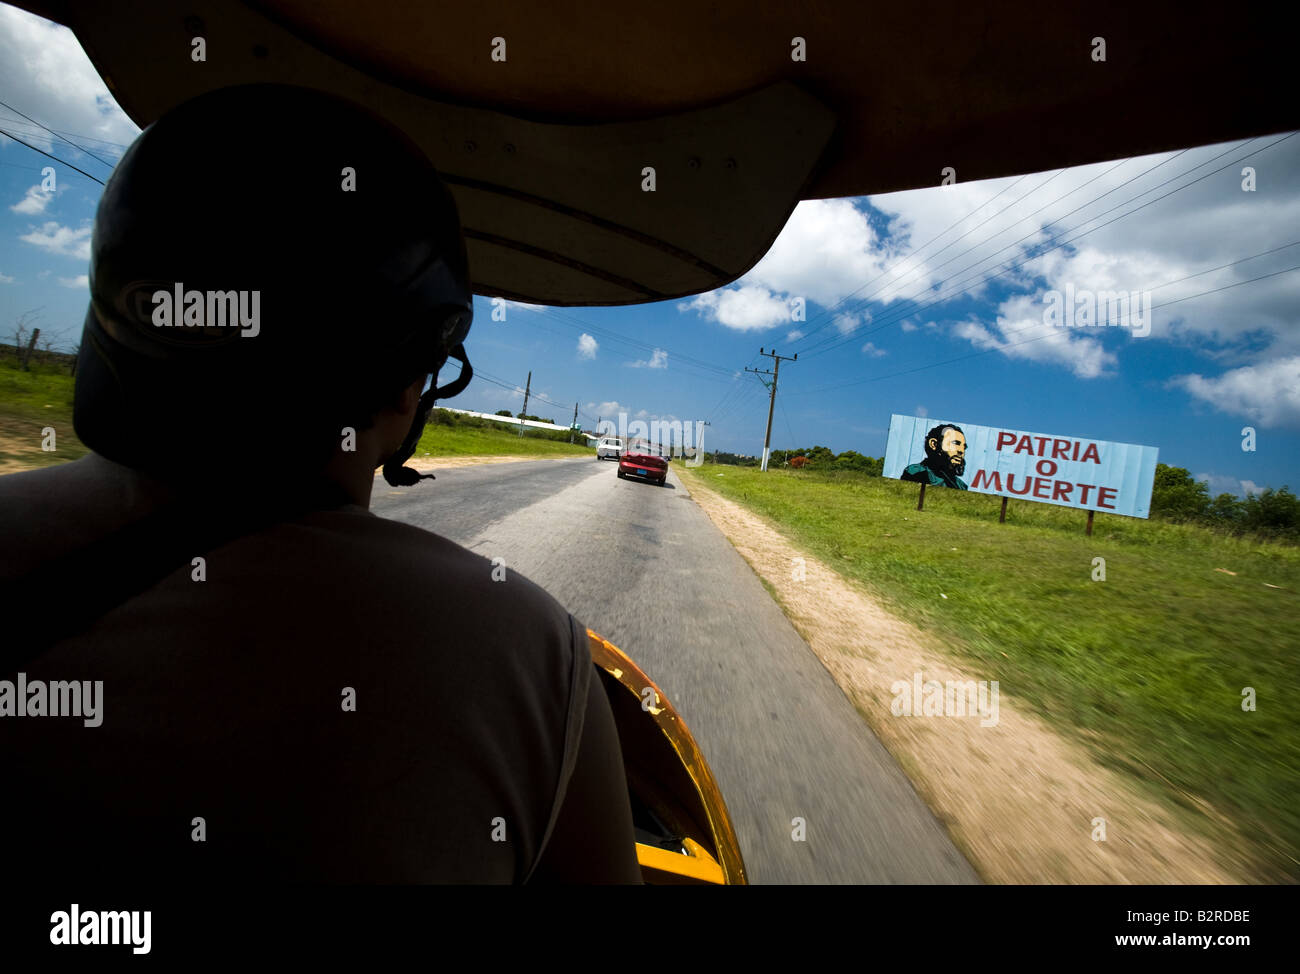 View from inside a coco taxi along the road from Trinidad to Ancon, Cuba Stock Photo